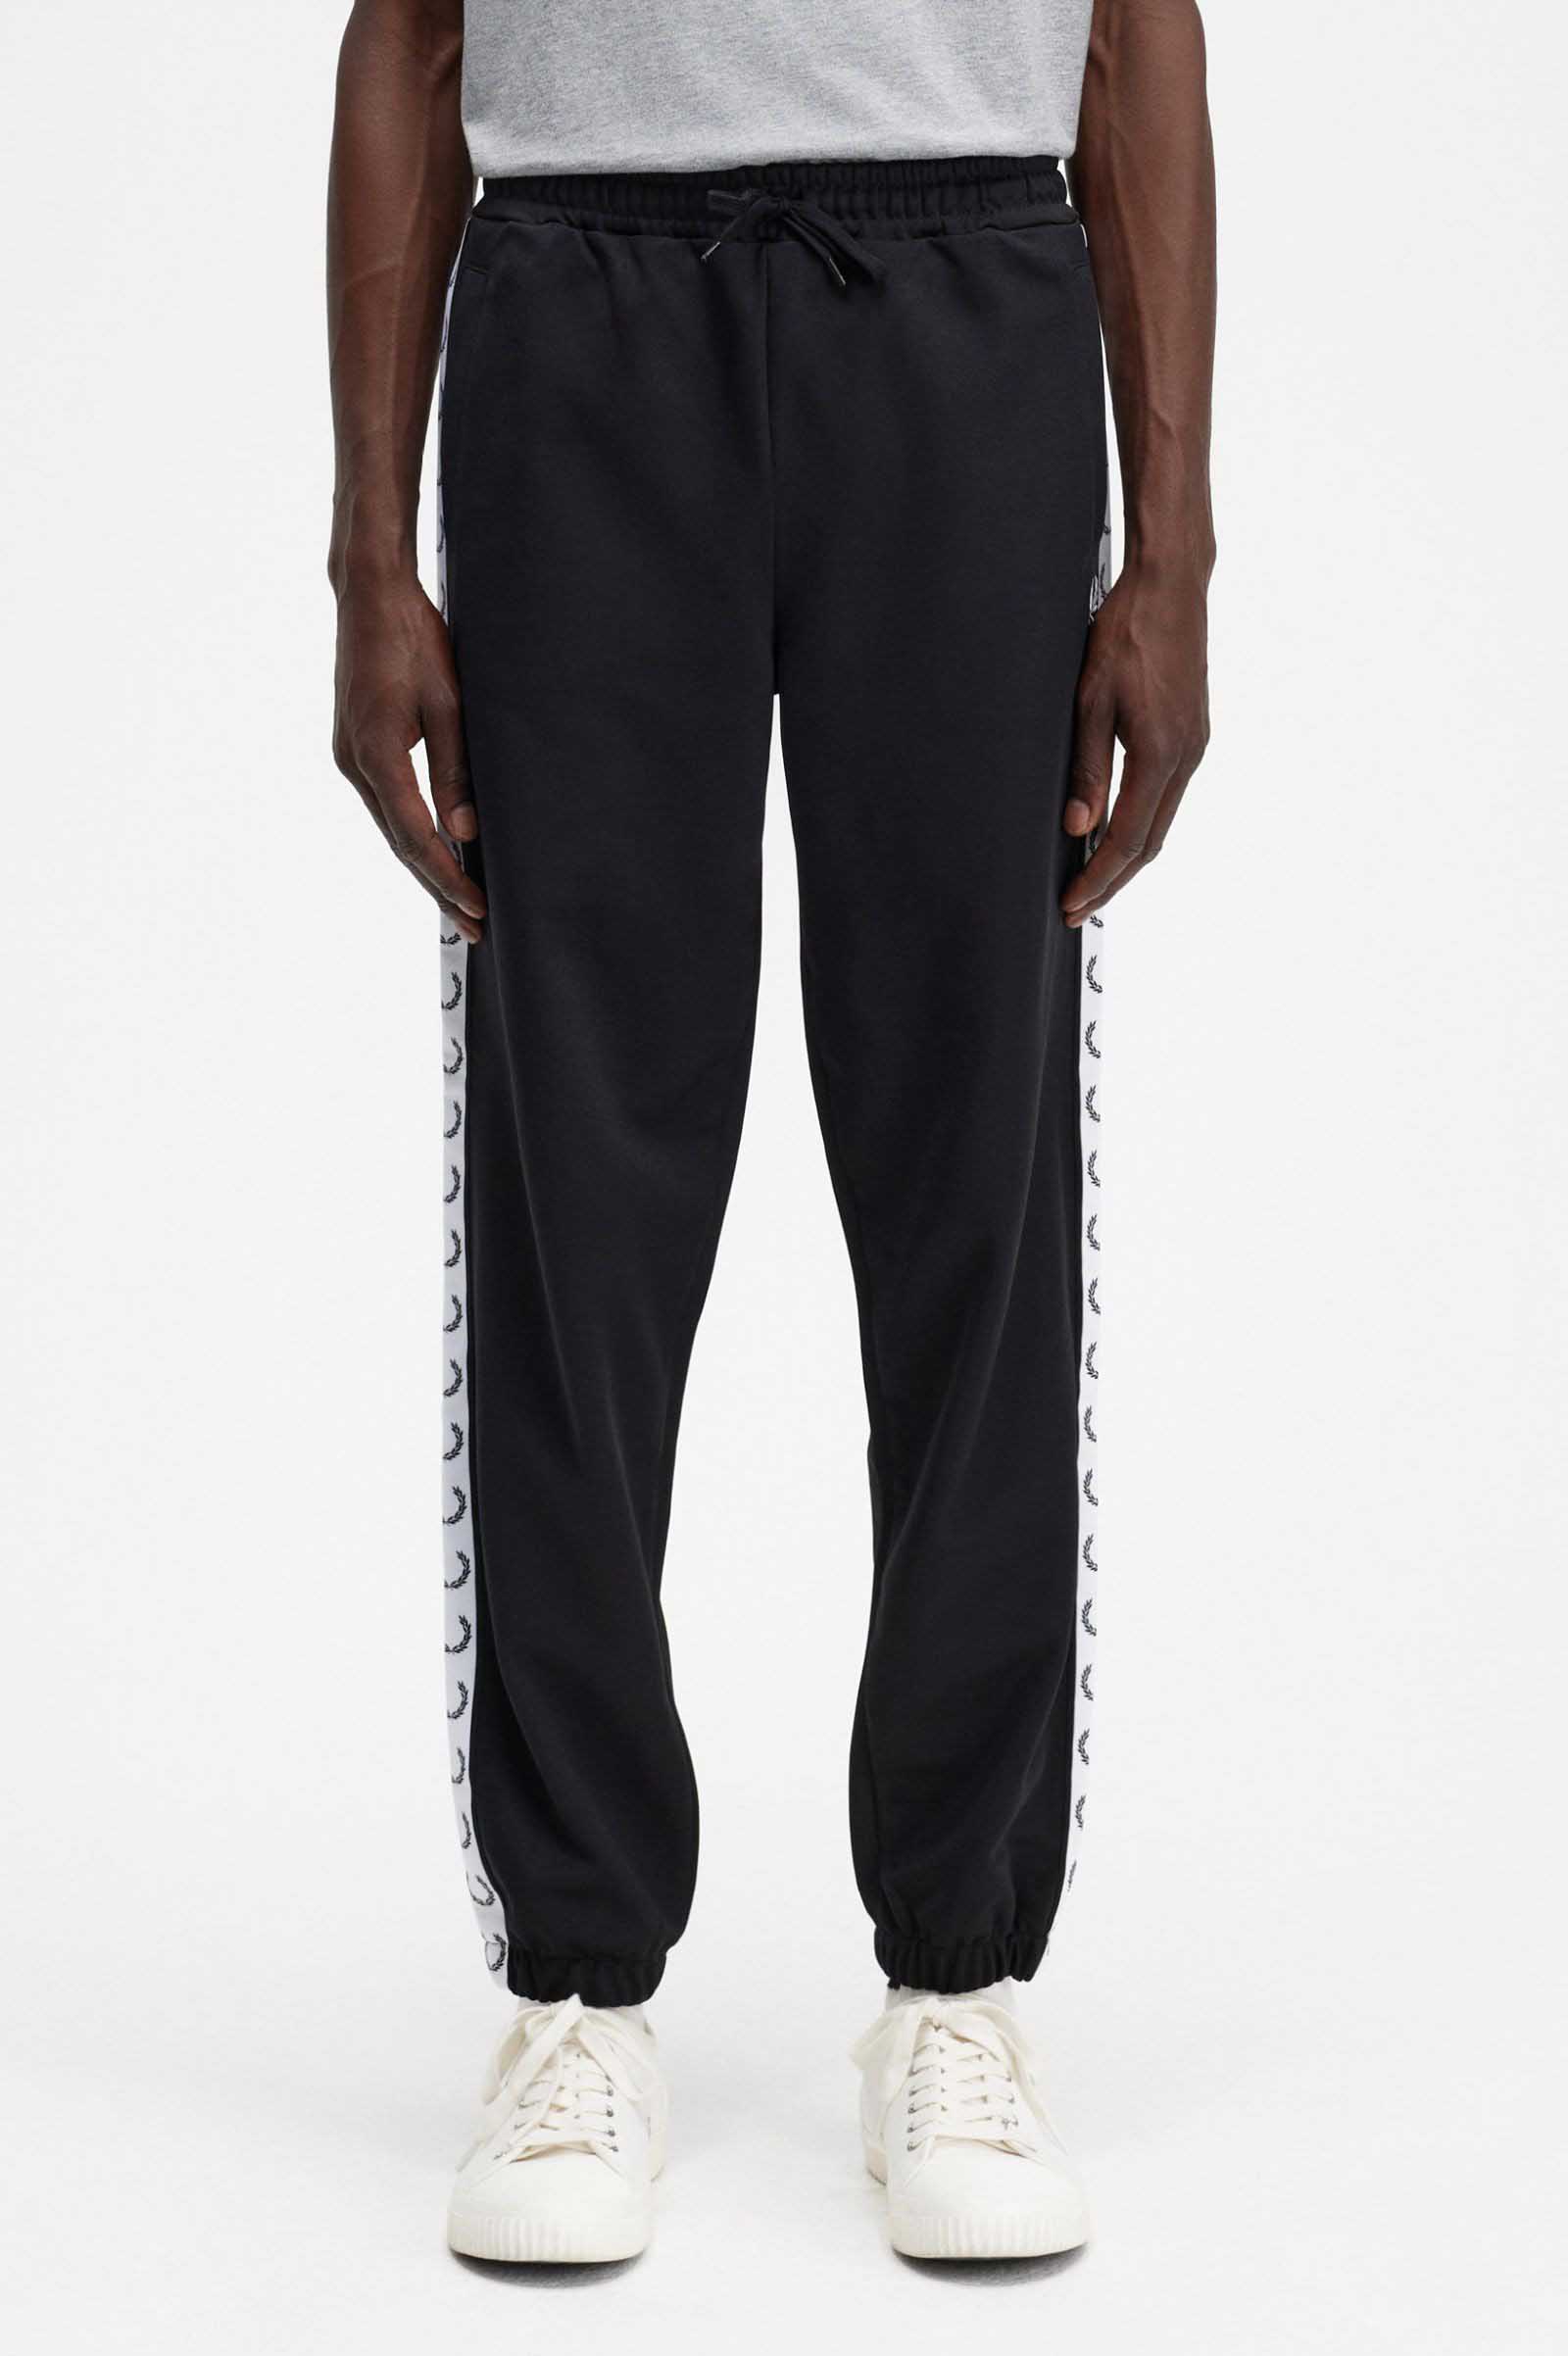 FRED PERRY SIDE TAPED TRACK PANTS